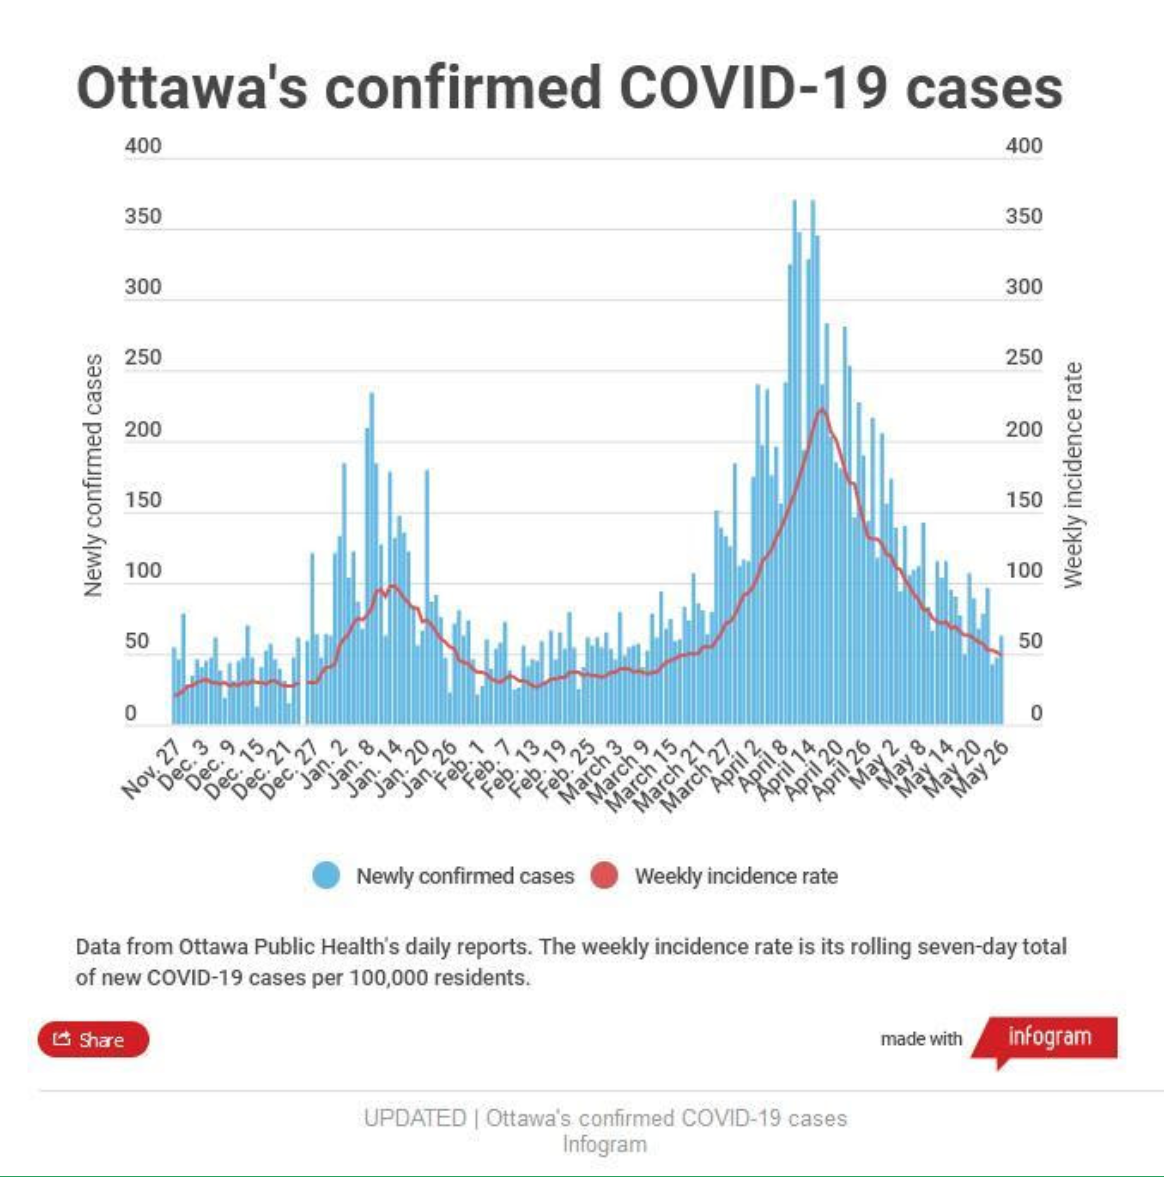 Ottawa's confirmed COVID-19 cases. Data from Ottawa Public Health's daily reports. The weekly incidence rate is its rolling seven-day total of new COVID-19 cases per 100,000 residents.